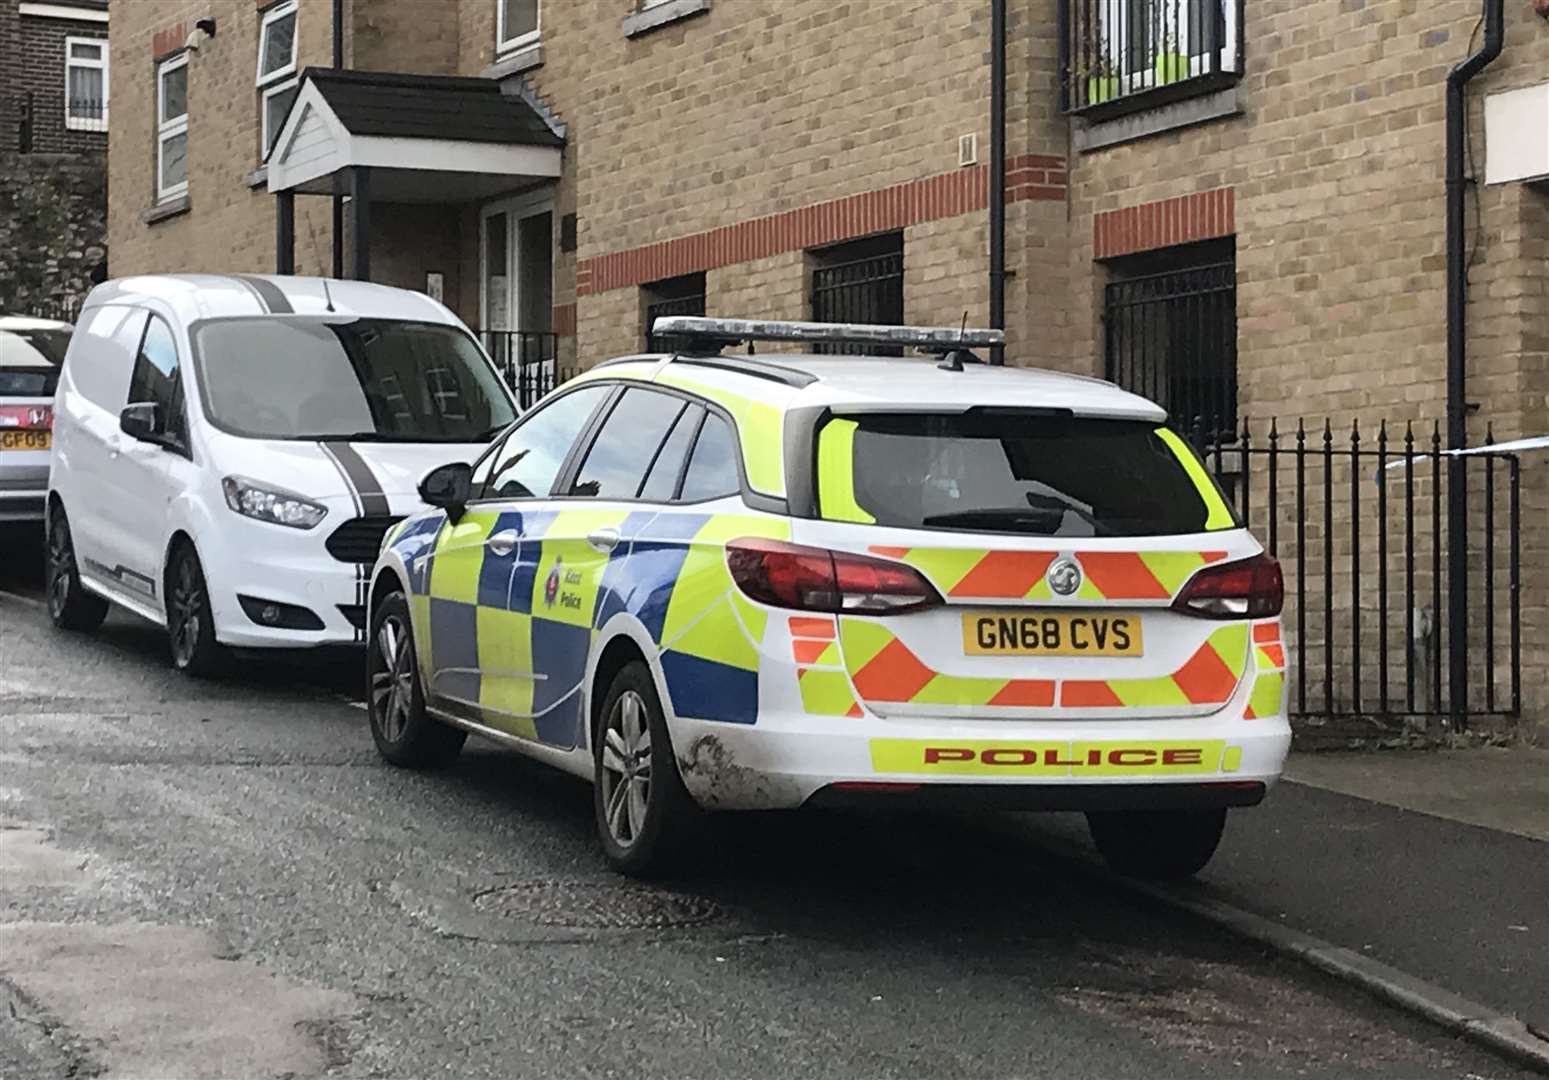 Police cars were seen at the scene in Rochester when the body was discovered in October